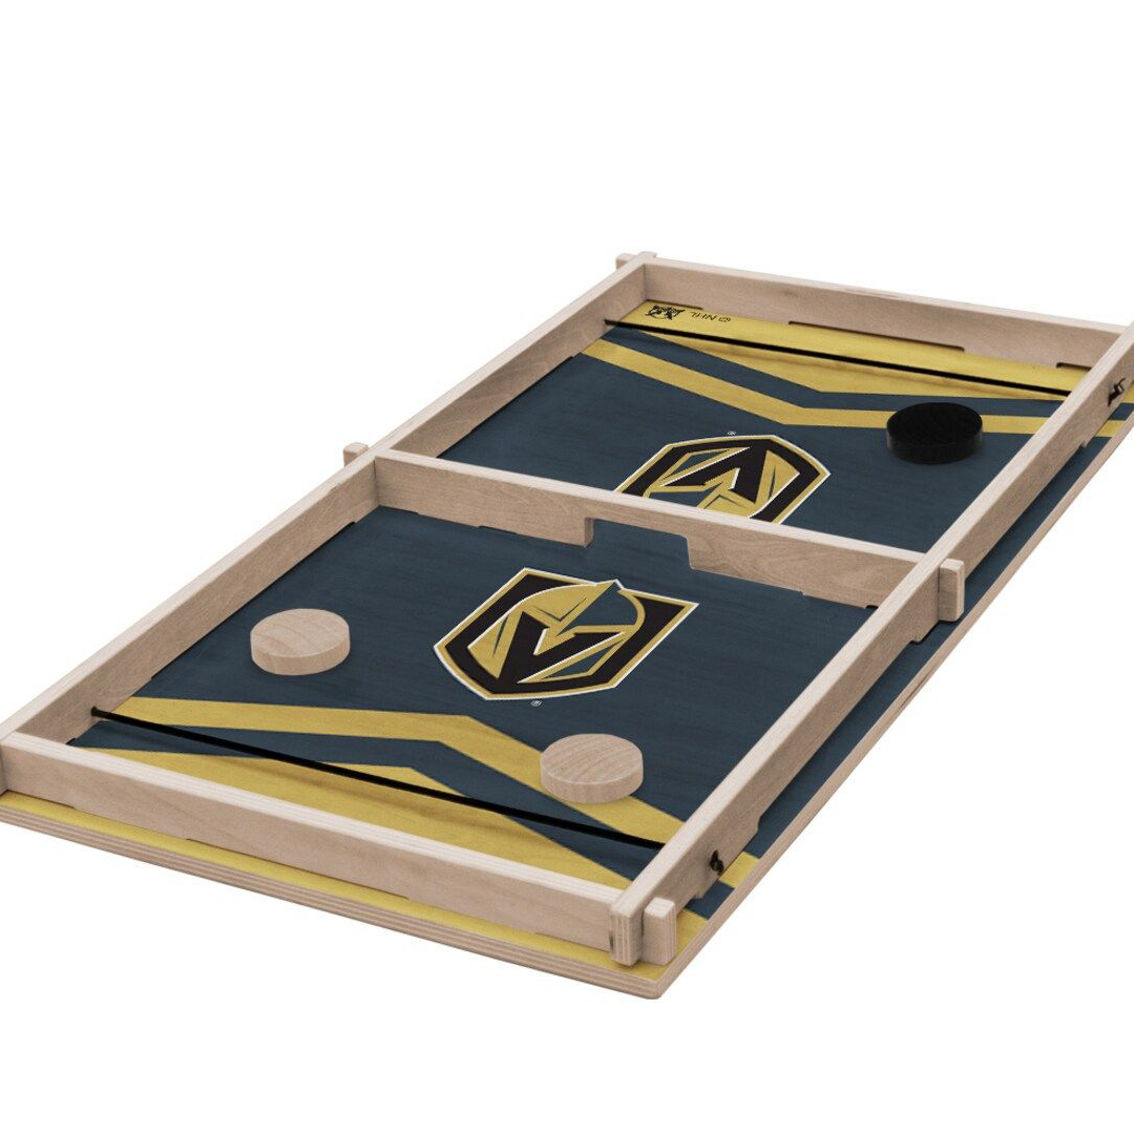 Victory Tailgate Vegas Golden Knights Fastrack Game - Image 2 of 2